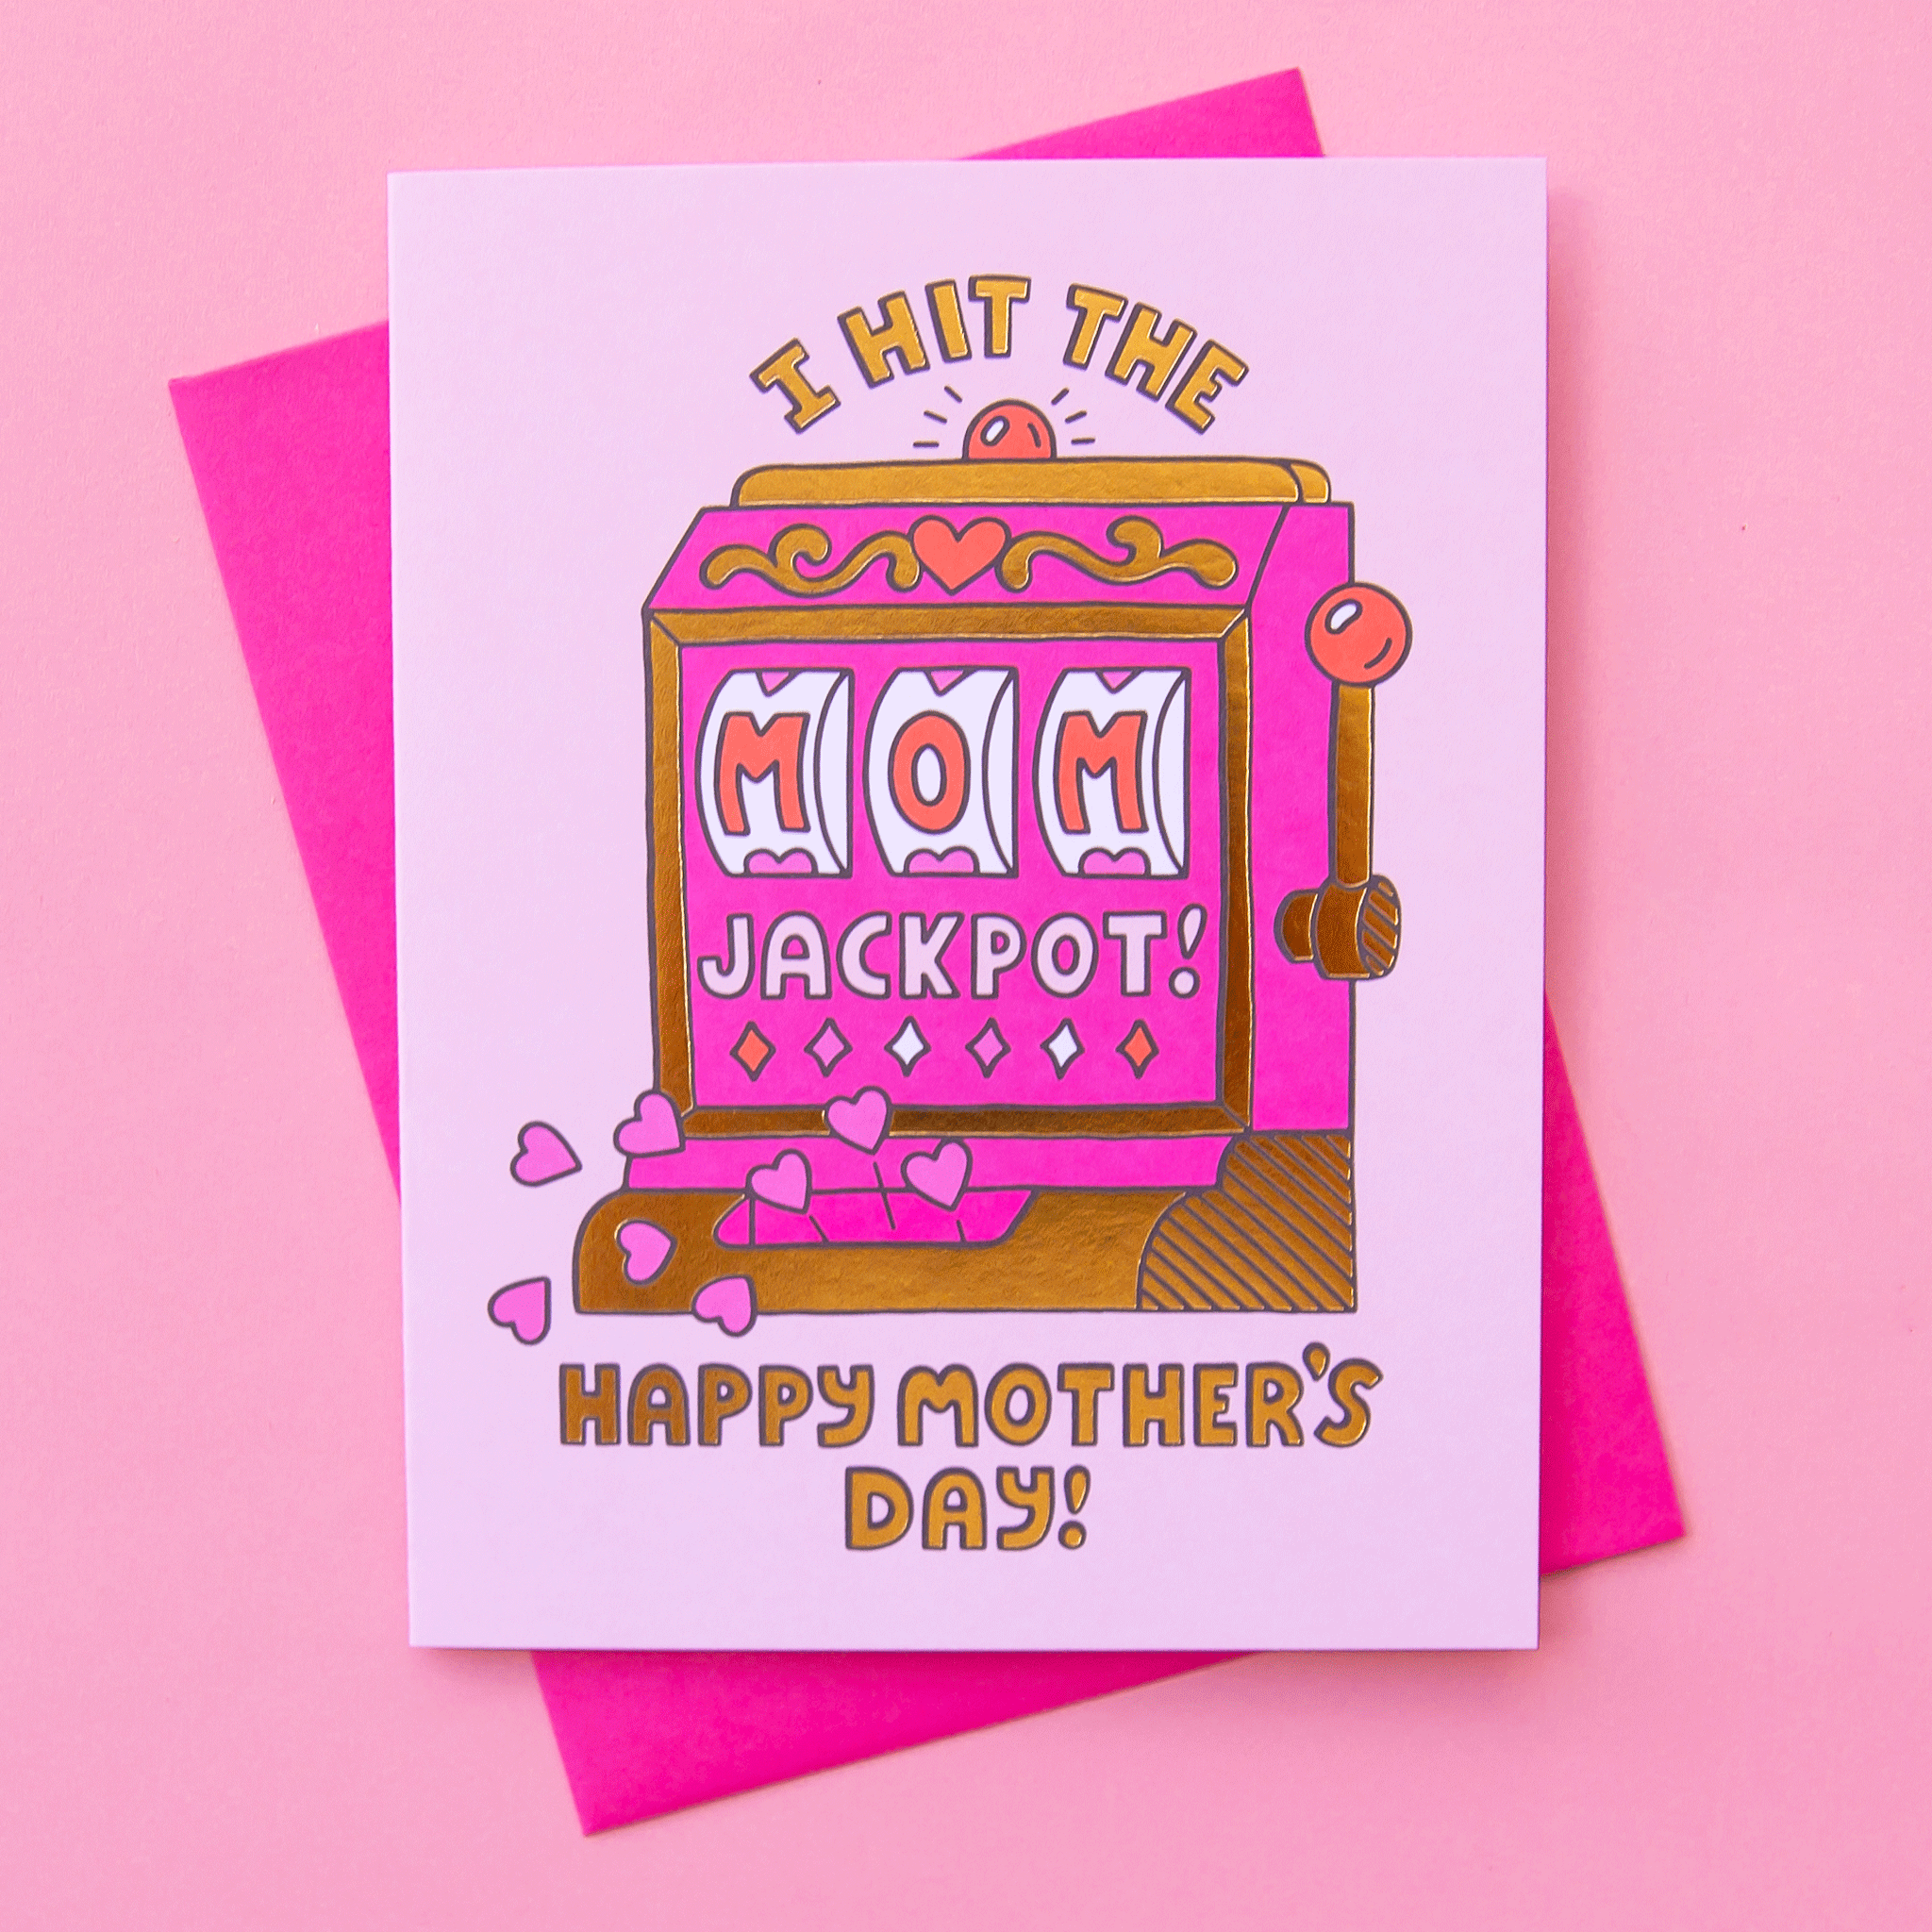 On a pink background is a white card with a pink and gold slot machine that's detailed with hearts and reads, "I hit the MOM jackpot! Happy Father's Day!". "MOM" is written in the slot machine as the winning numbers. Also included is a coordinating white envelope.